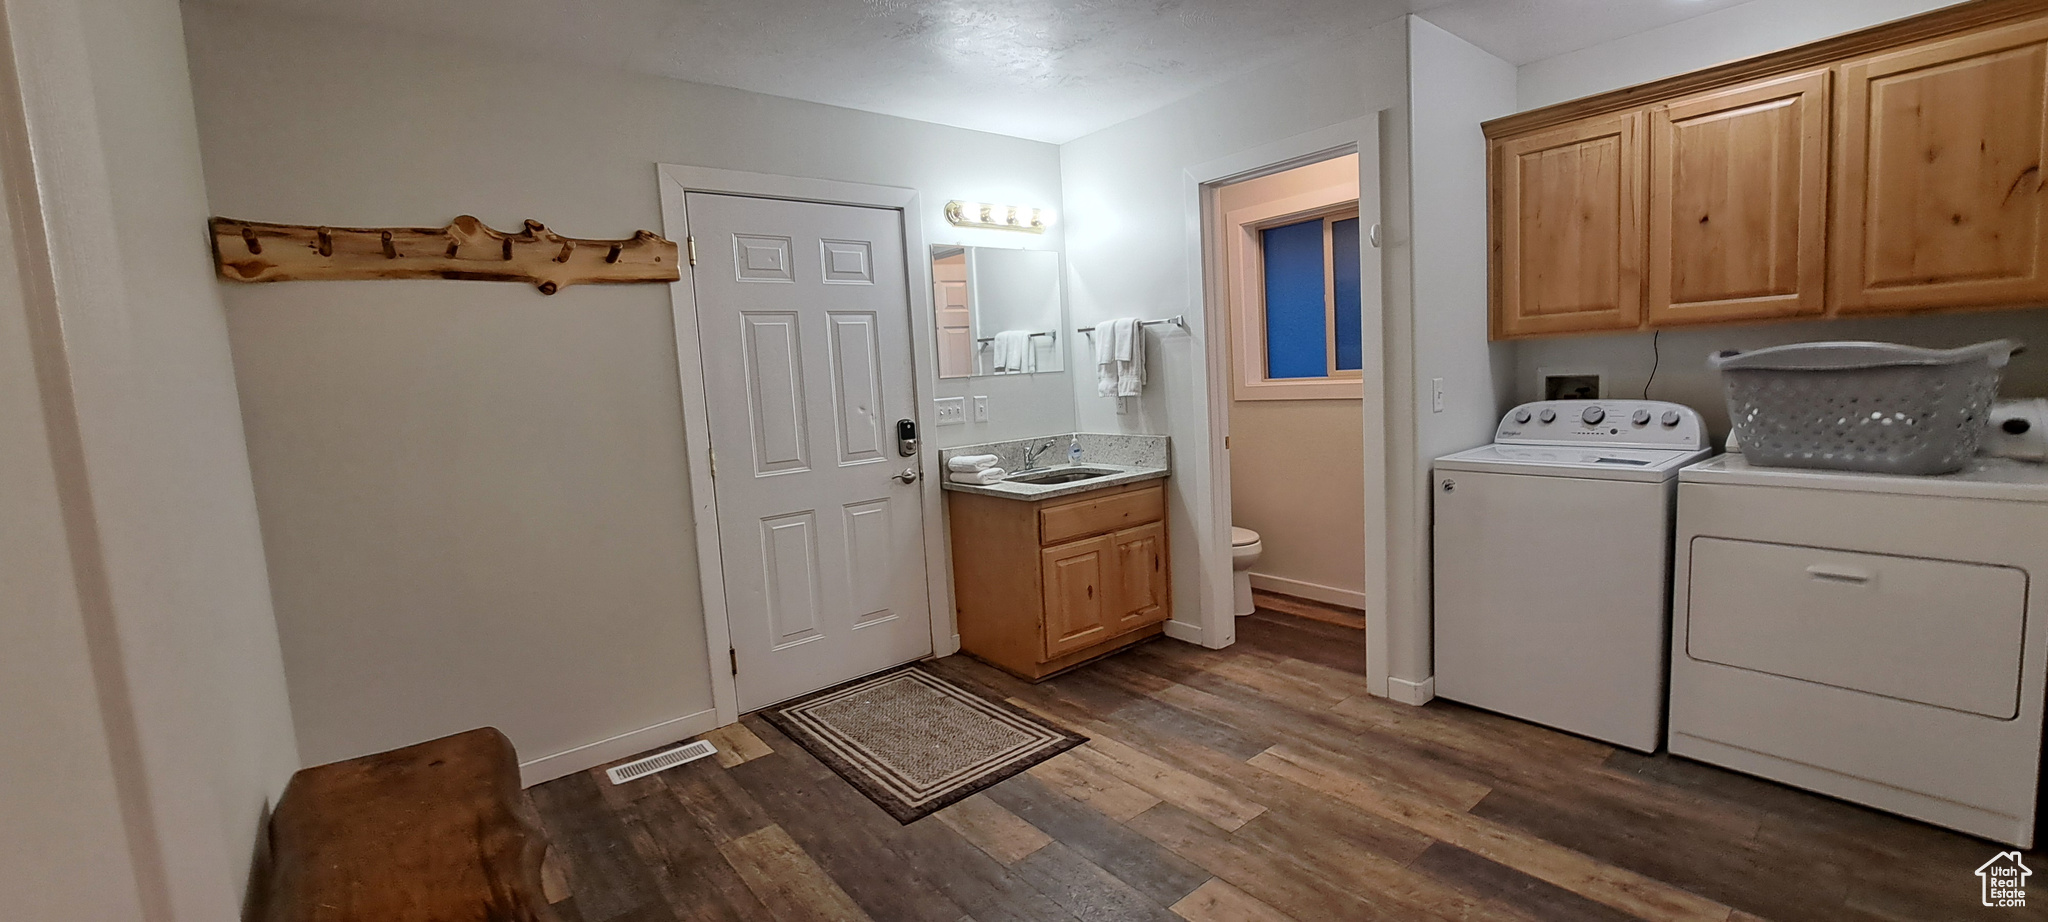 Laundry area with washer hookup, dark hardwood / wood-style flooring, washer and dryer, sink, and cabinets